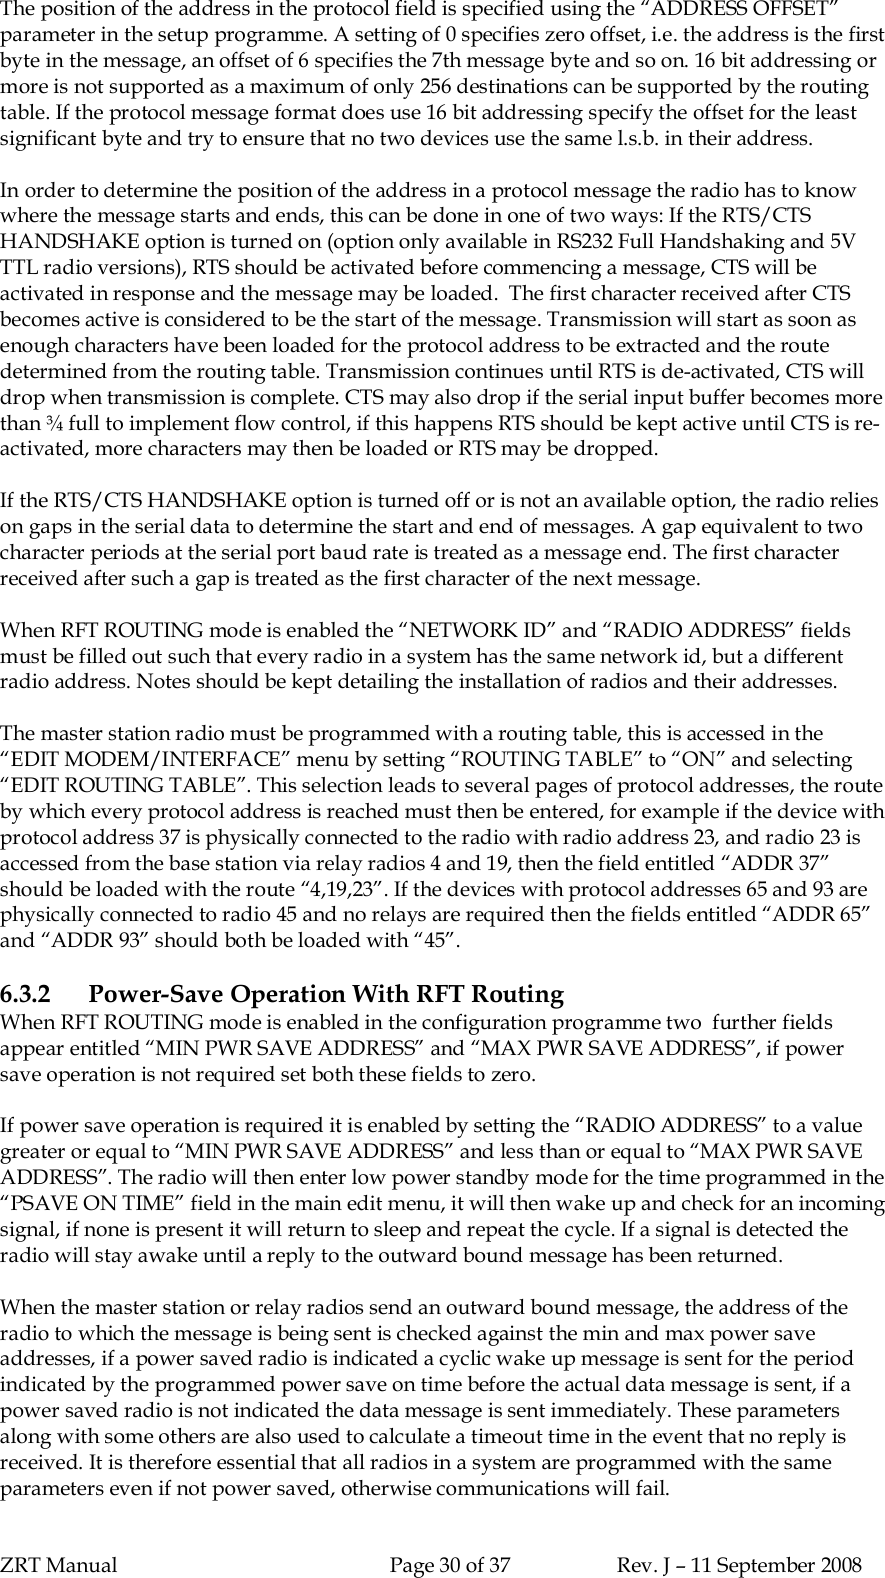 ZRT Manual Page 30 of 37 Rev. J – 11 September 2008The position of the address in the protocol field is specified using the “ADDRESS OFFSET”parameter in the setup programme. A setting of 0 specifies zero offset, i.e. the address is the firstbyte in the message, an offset of 6 specifies the 7th message byte and so on. 16 bit addressing ormore is not supported as a maximum of only 256 destinations can be supported by the routingtable. If the protocol message format does use 16 bit addressing specify the offset for the leastsignificant byte and try to ensure that no two devices use the same l.s.b. in their address.In order to determine the position of the address in a protocol message the radio has to knowwhere the message starts and ends, this can be done in one of two ways: If the RTS/CTSHANDSHAKE option is turned on (option only available in RS232 Full Handshaking and 5VTTL radio versions), RTS should be activated before commencing a message, CTS will beactivated in response and the message may be loaded.  The first character received after CTSbecomes active is considered to be the start of the message. Transmission will start as soon asenough characters have been loaded for the protocol address to be extracted and the routedetermined from the routing table. Transmission continues until RTS is de-activated, CTS willdrop when transmission is complete. CTS may also drop if the serial input buffer becomes morethan ¾ full to implement flow control, if this happens RTS should be kept active until CTS is re-activated, more characters may then be loaded or RTS may be dropped.If the RTS/CTS HANDSHAKE option is turned off or is not an available option, the radio relieson gaps in the serial data to determine the start and end of messages. A gap equivalent to twocharacter periods at the serial port baud rate is treated as a message end. The first characterreceived after such a gap is treated as the first character of the next message.When RFT ROUTING mode is enabled the “NETWORK ID” and “RADIO ADDRESS” fieldsmust be filled out such that every radio in a system has the same network id, but a differentradio address. Notes should be kept detailing the installation of radios and their addresses.The master station radio must be programmed with a routing table, this is accessed in the“EDIT MODEM/INTERFACE” menu by setting “ROUTING TABLE” to “ON” and selecting“EDIT ROUTING TABLE”. This selection leads to several pages of protocol addresses, the routeby which every protocol address is reached must then be entered, for example if the device withprotocol address 37 is physically connected to the radio with radio address 23, and radio 23 isaccessed from the base station via relay radios 4 and 19, then the field entitled “ADDR 37”should be loaded with the route “4,19,23”. If the devices with protocol addresses 65 and 93 arephysically connected to radio 45 and no relays are required then the fields entitled “ADDR 65”and “ADDR 93” should both be loaded with “45”.6.3.2 Power-Save Operation With RFT RoutingWhen RFT ROUTING mode is enabled in the configuration programme two  further fieldsappear entitled “MIN PWR SAVE ADDRESS” and “MAX PWR SAVE ADDRESS”, if powersave operation is not required set both these fields to zero.If power save operation is required it is enabled by setting the “RADIO ADDRESS” to a valuegreater or equal to “MIN PWR SAVE ADDRESS” and less than or equal to “MAX PWR SAVEADDRESS”. The radio will then enter low power standby mode for the time programmed in the“PSAVE ON TIME” field in the main edit menu, it will then wake up and check for an incomingsignal, if none is present it will return to sleep and repeat the cycle. If a signal is detected theradio will stay awake until a reply to the outward bound message has been returned.When the master station or relay radios send an outward bound message, the address of theradio to which the message is being sent is checked against the min and max power saveaddresses, if a power saved radio is indicated a cyclic wake up message is sent for the periodindicated by the programmed power save on time before the actual data message is sent, if apower saved radio is not indicated the data message is sent immediately. These parametersalong with some others are also used to calculate a timeout time in the event that no reply isreceived. It is therefore essential that all radios in a system are programmed with the sameparameters even if not power saved, otherwise communications will fail.